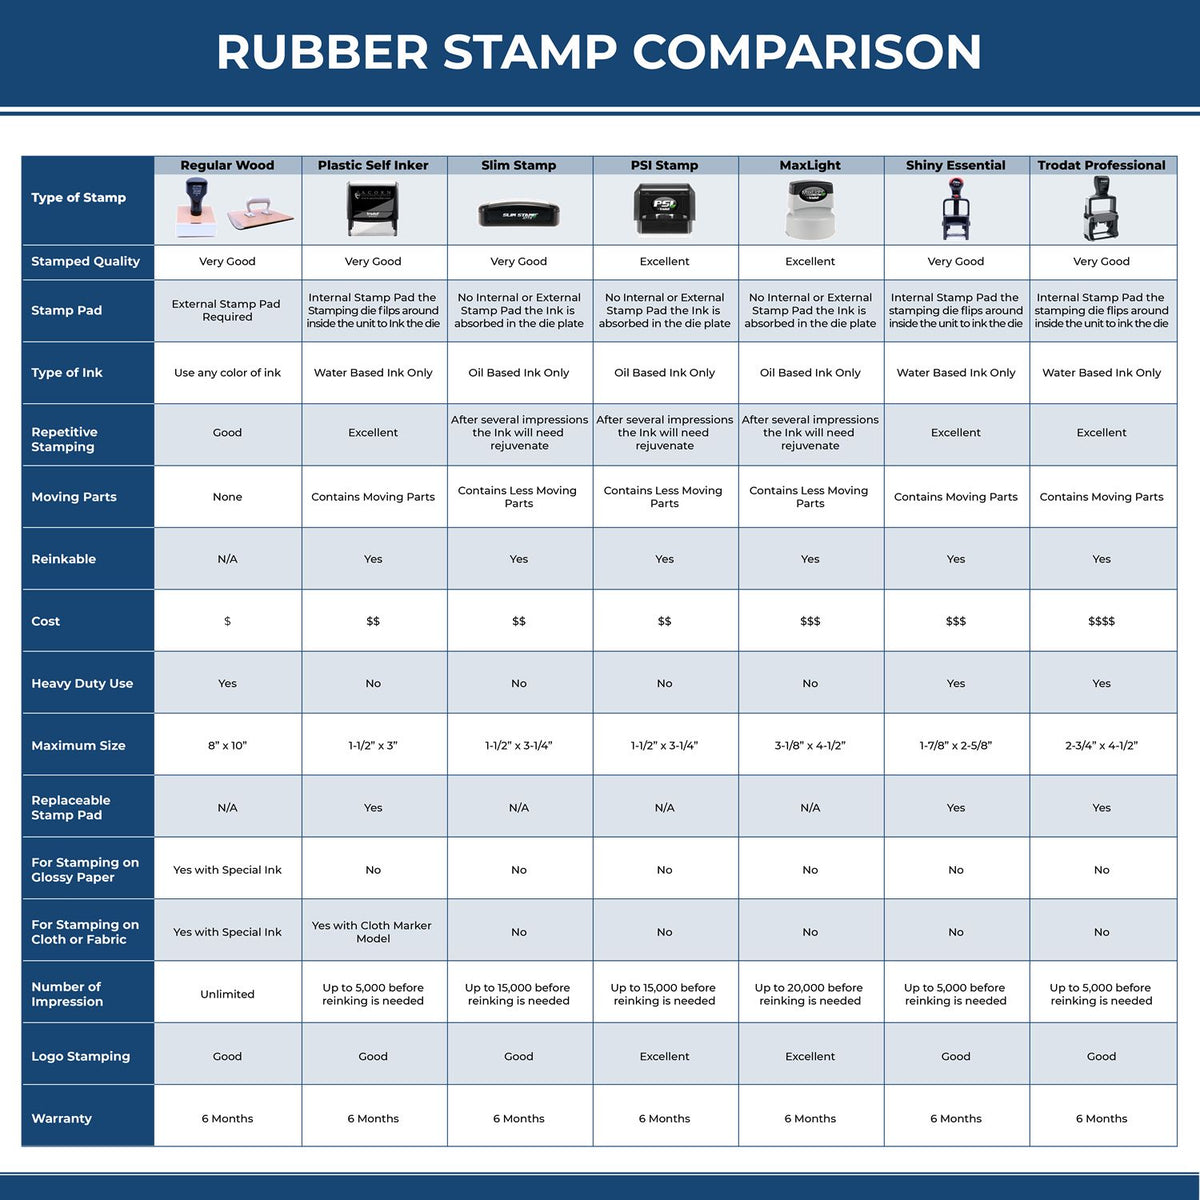 A comparison chart for the different types of mount models available for the PSI Virginia Notary Stamp.